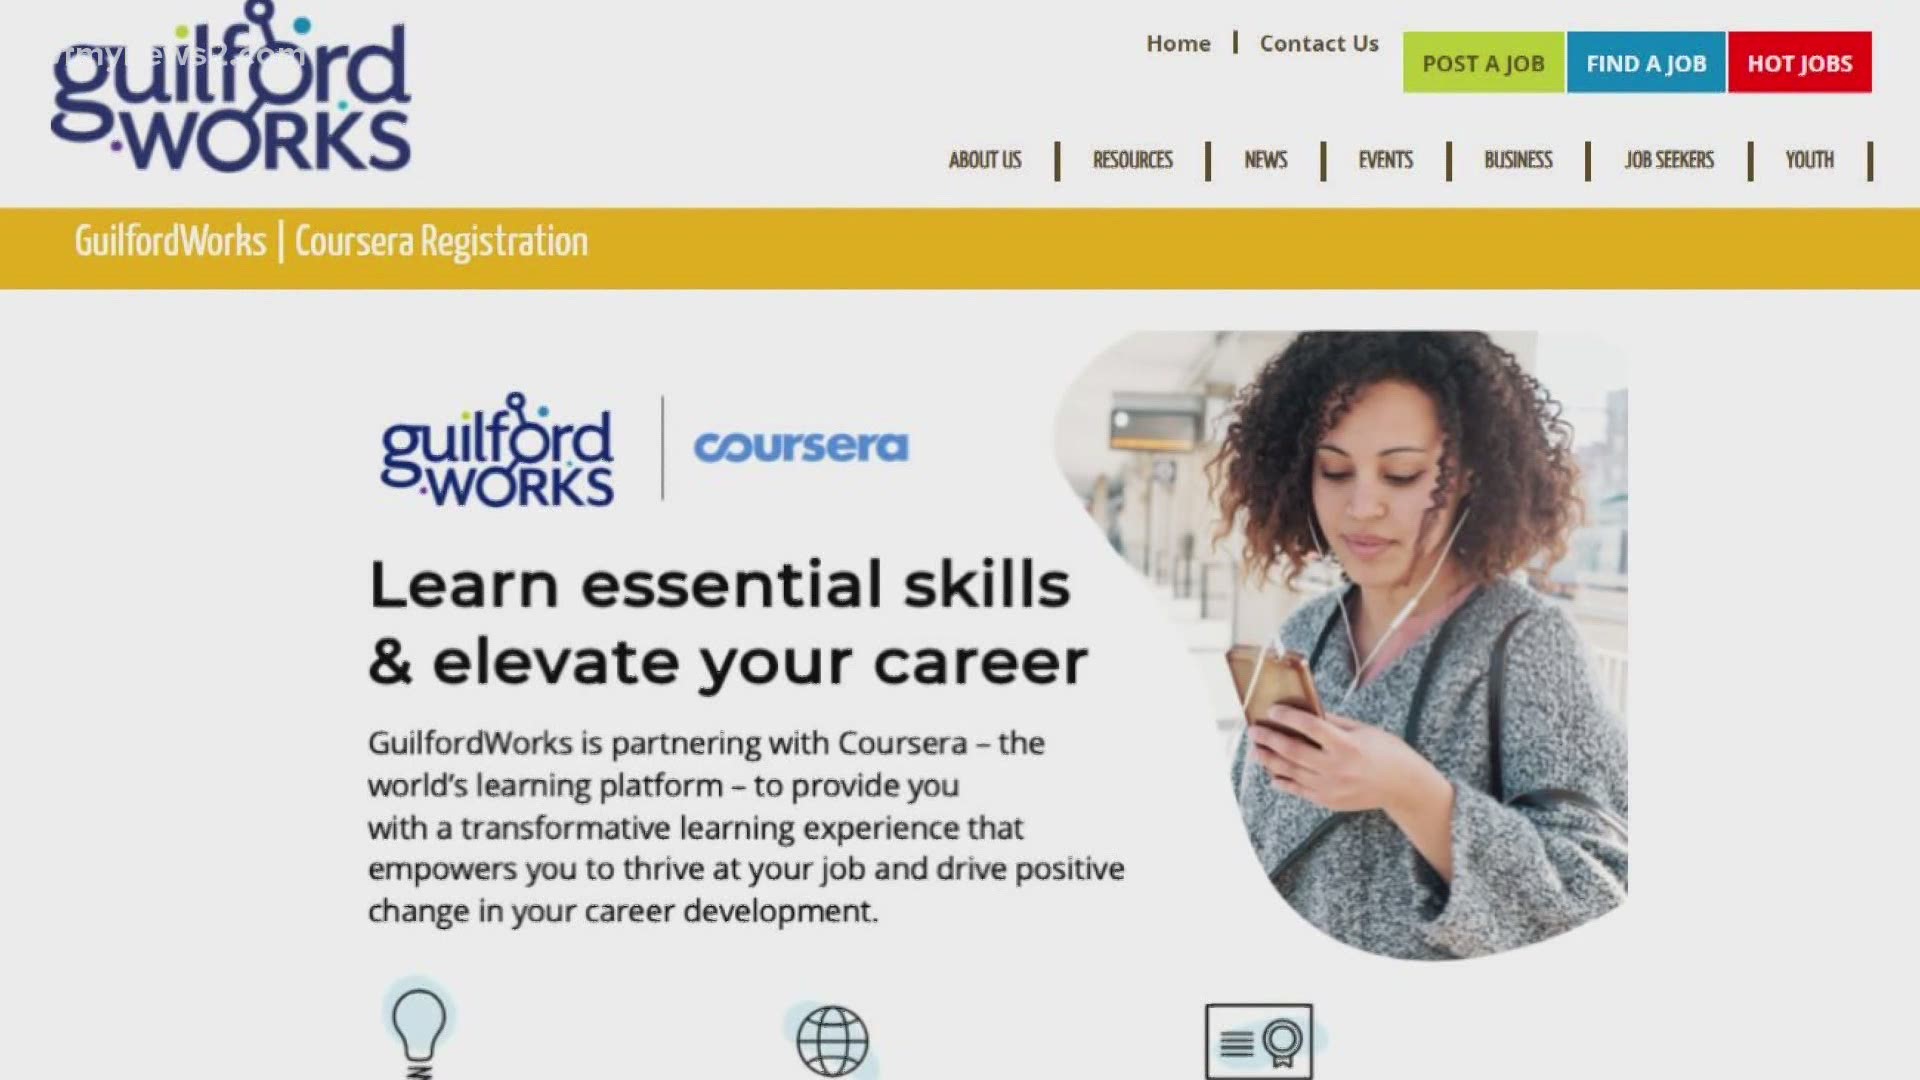 Guilfordworks is offering free self-guided online courses for unemployed or furloughed workers. More than 3,000 courses are being offered to workers.